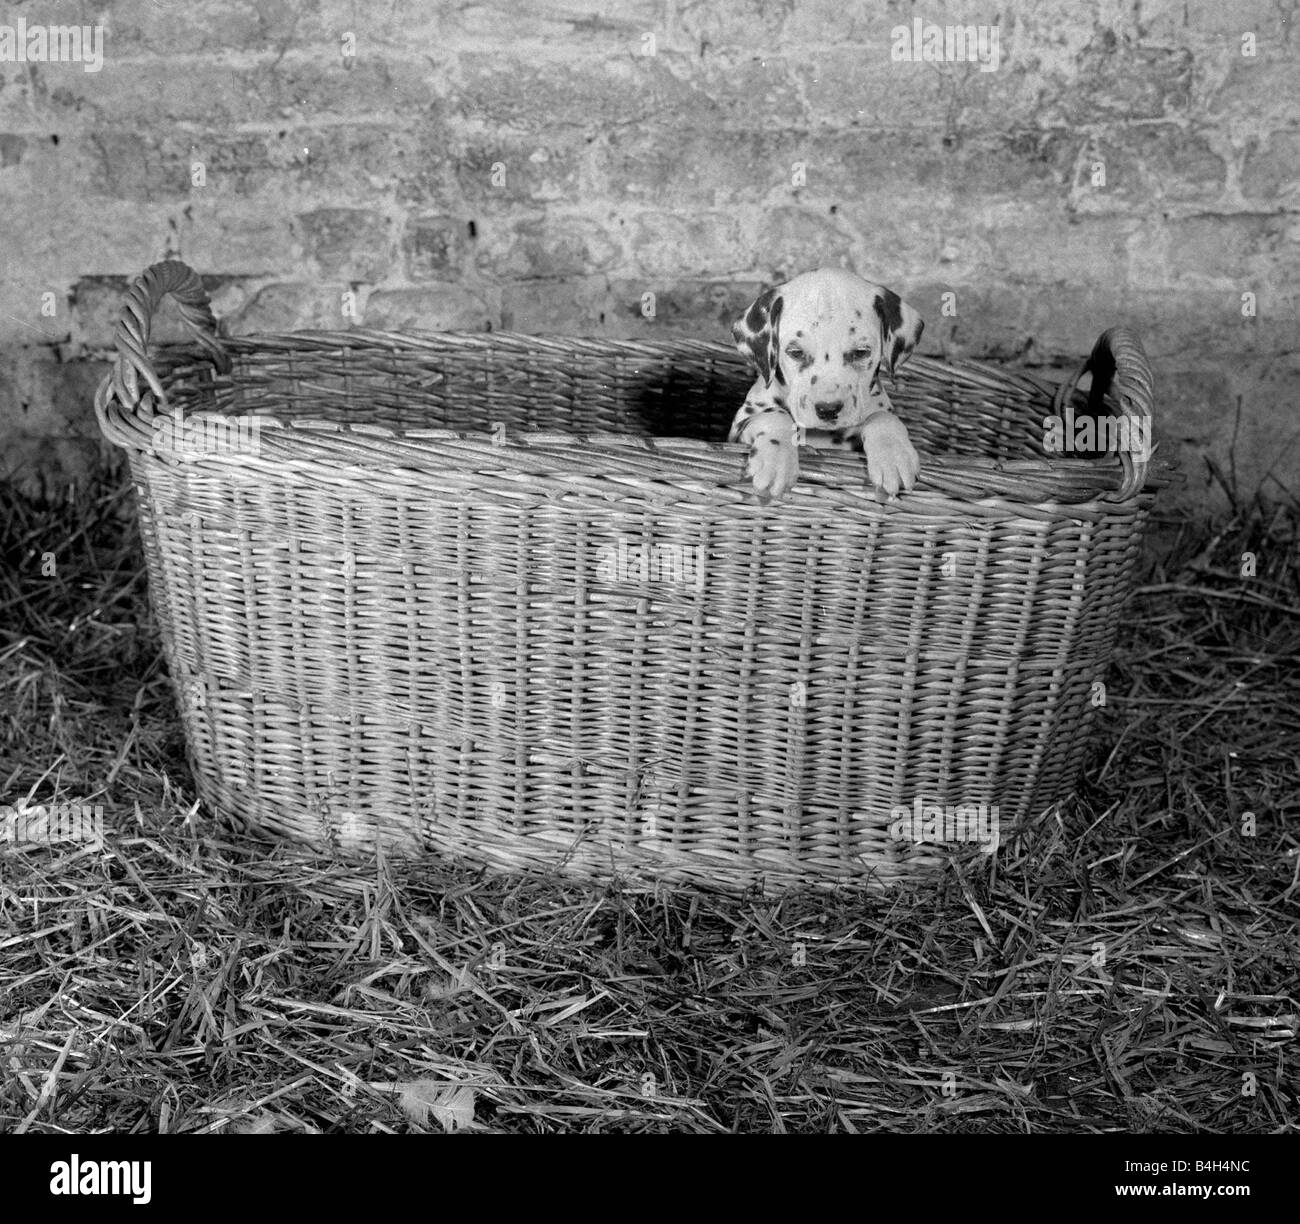 Dalmatian Puppy peeps over a large wicker basket Animals Dogs Puppies Cute Dalmatian puppy pups December 1964 Mirrorpix Stock Photo